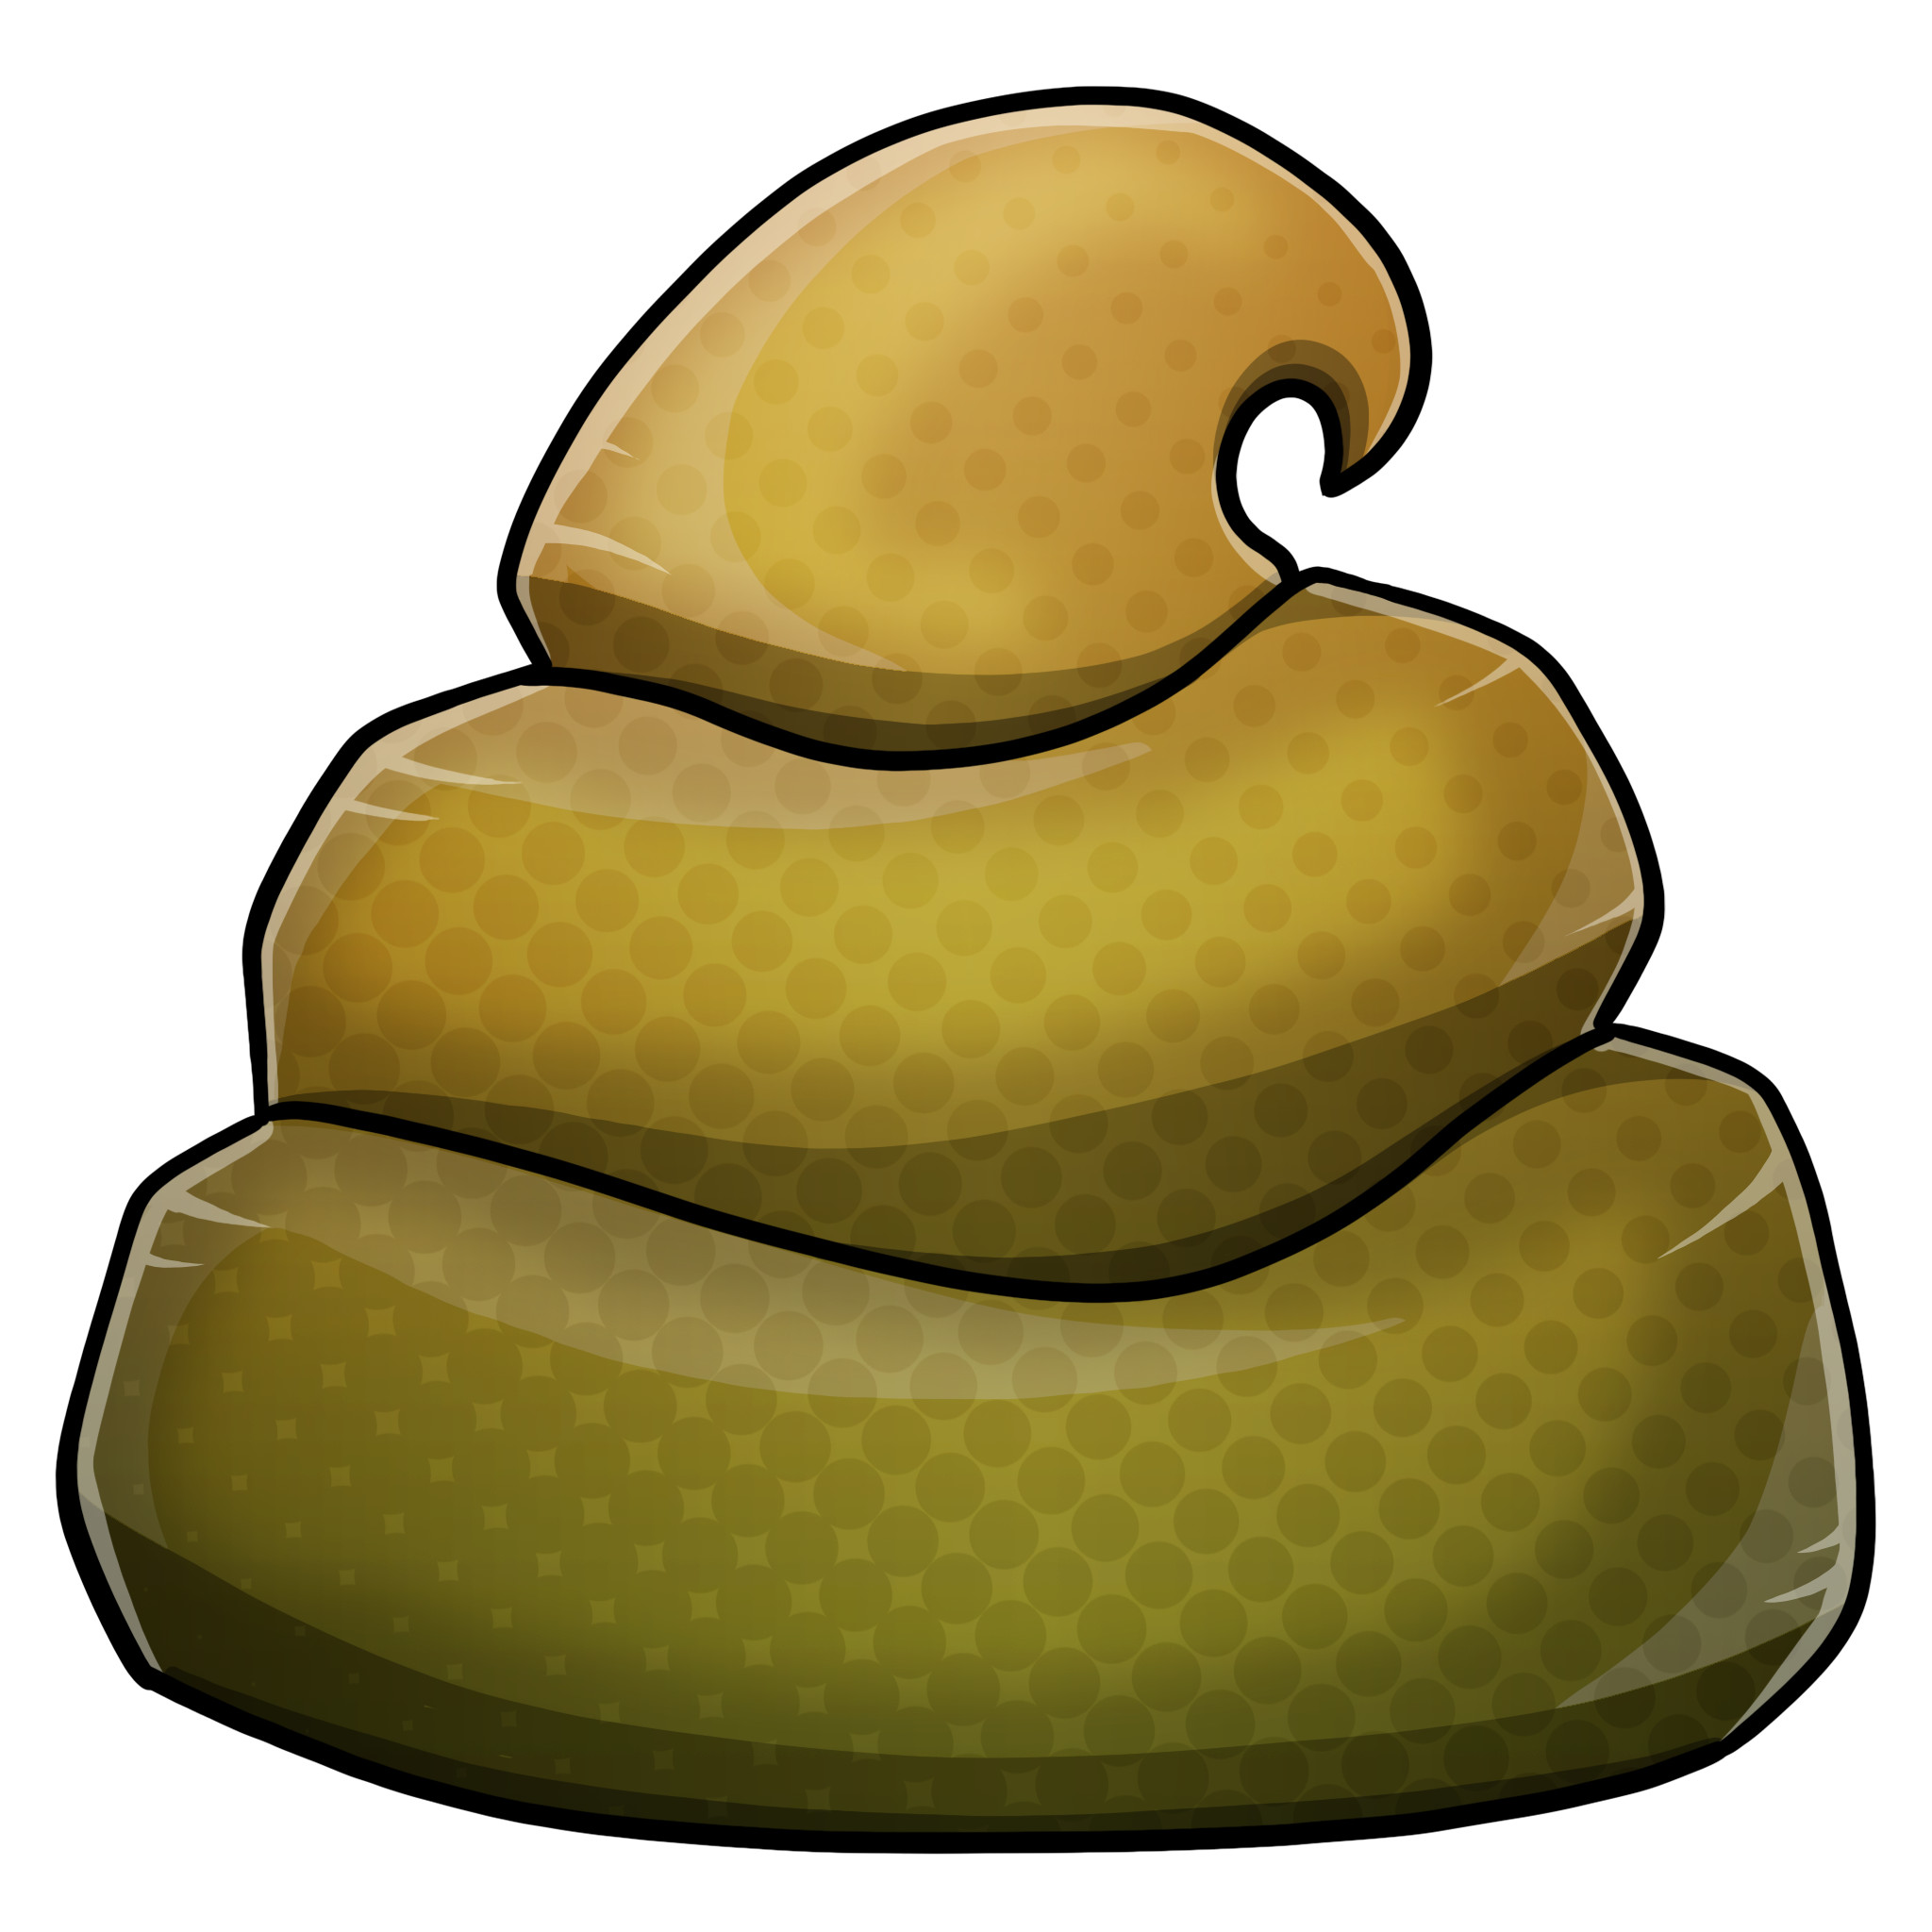 (Hey, if the client requests a Poo emoji, you may as well make it look as good as possible)